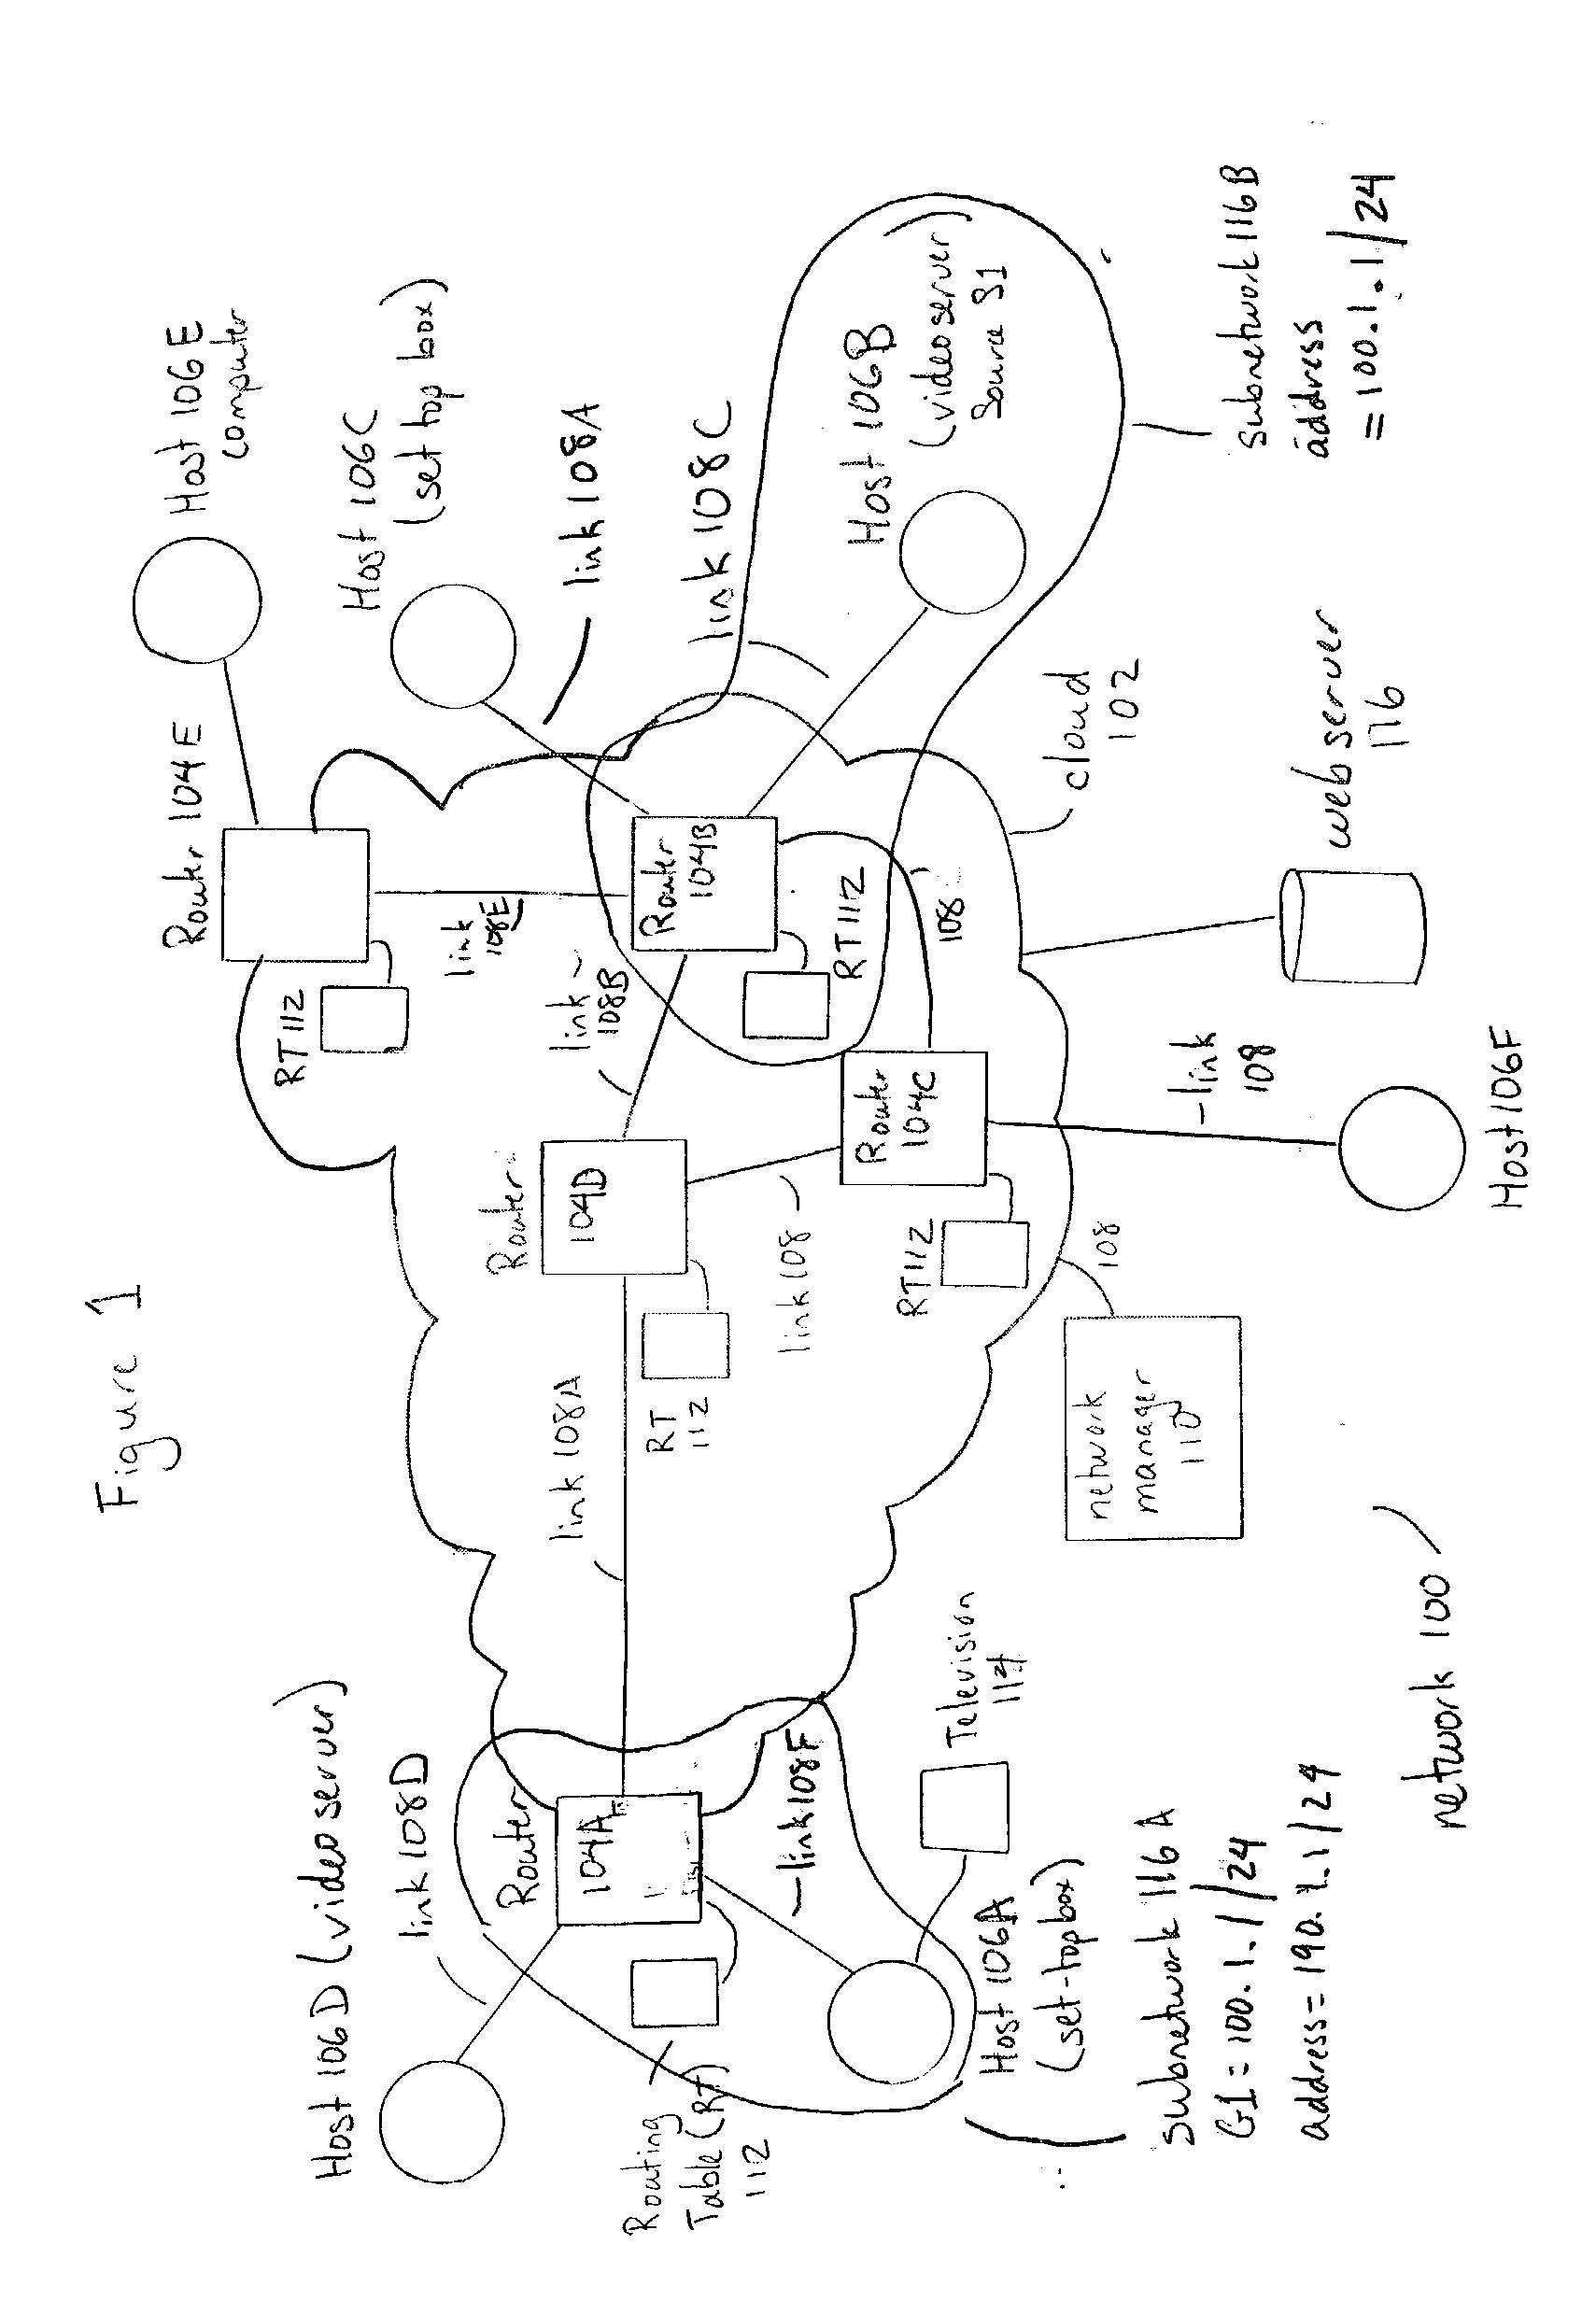 System and method for converting requests between different multicast protocols in a communication network